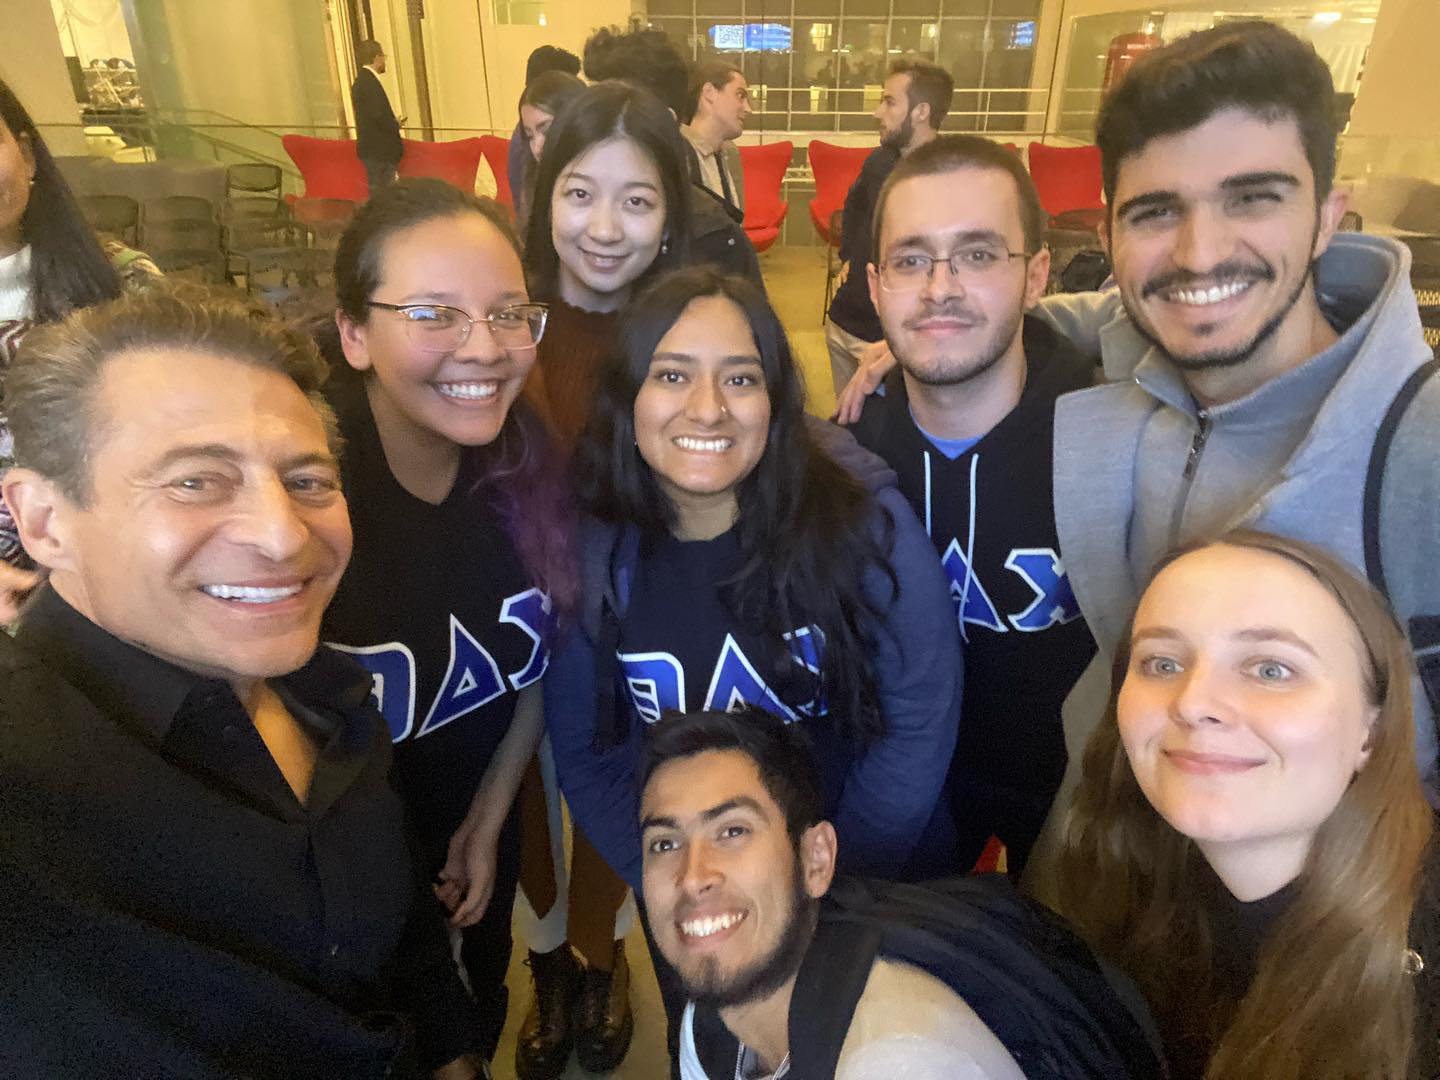 A bit of a recap from last week&rsquo;s events 📸

&bull;Met MIT TDC&rsquo;s alumnus Peter Diamandis 🚀
&bull;Weekly pset party
&bull;Weekly study study break